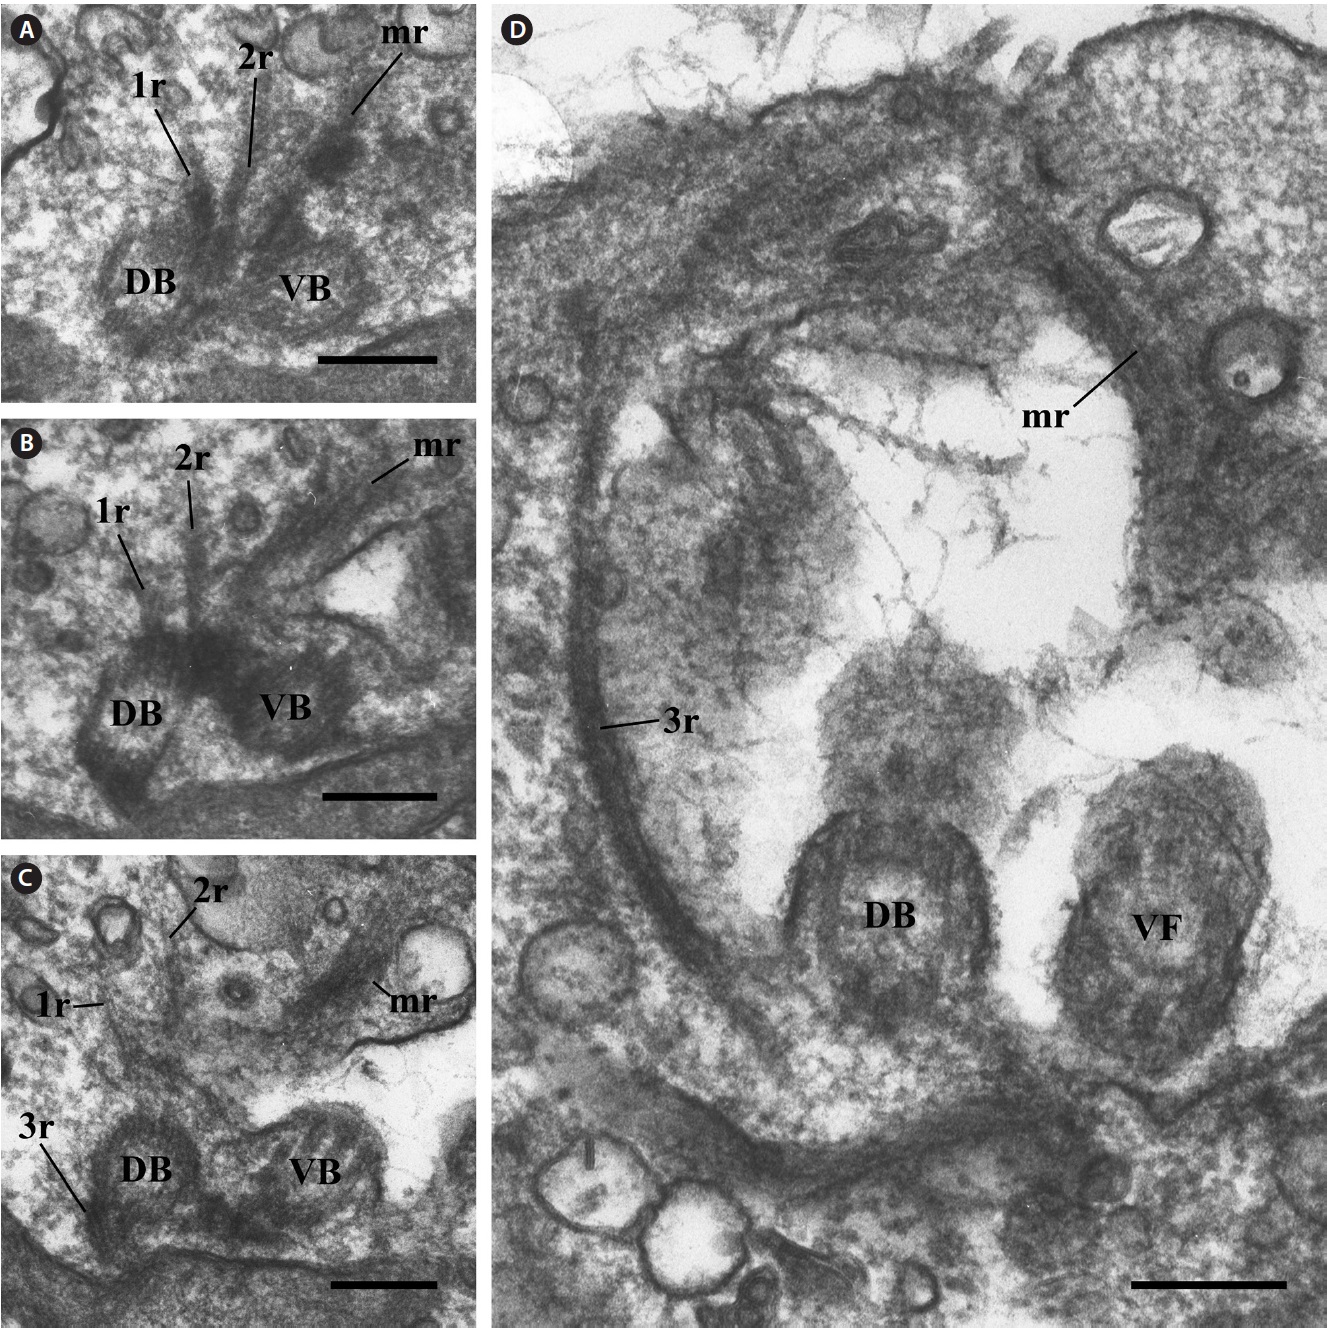 Transmission electron micrographs of microtubular roots. (A-D) Serial oblique sections showing the spatial relationship among the onestranded
microtubular root (1r), two-stranded microtubular root (2r), and another microtubular root (mr) extending from the left side of the two
basal bodies in the anterior direction. The mr extended at a different angle. The three-stranded microtubular root (3r) extended toward the left
side of the two basal bodies. DB, dorsal basal body; VB, ventral basal body; VF, ventral flagellum. Scale bars represent: A-D, 0.2 μm.